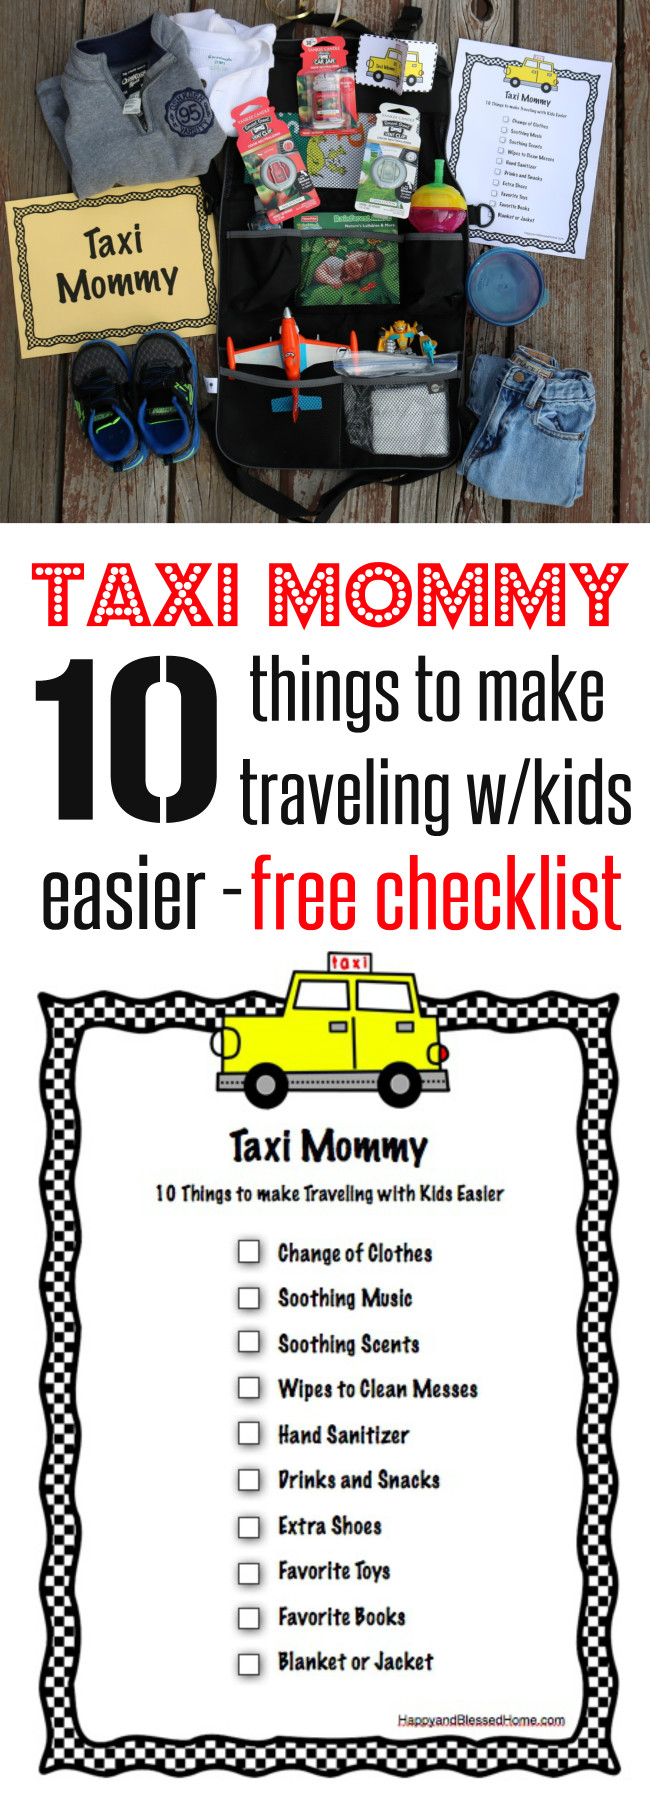 Easy free checklist to help moms stay organized with kids in the car!